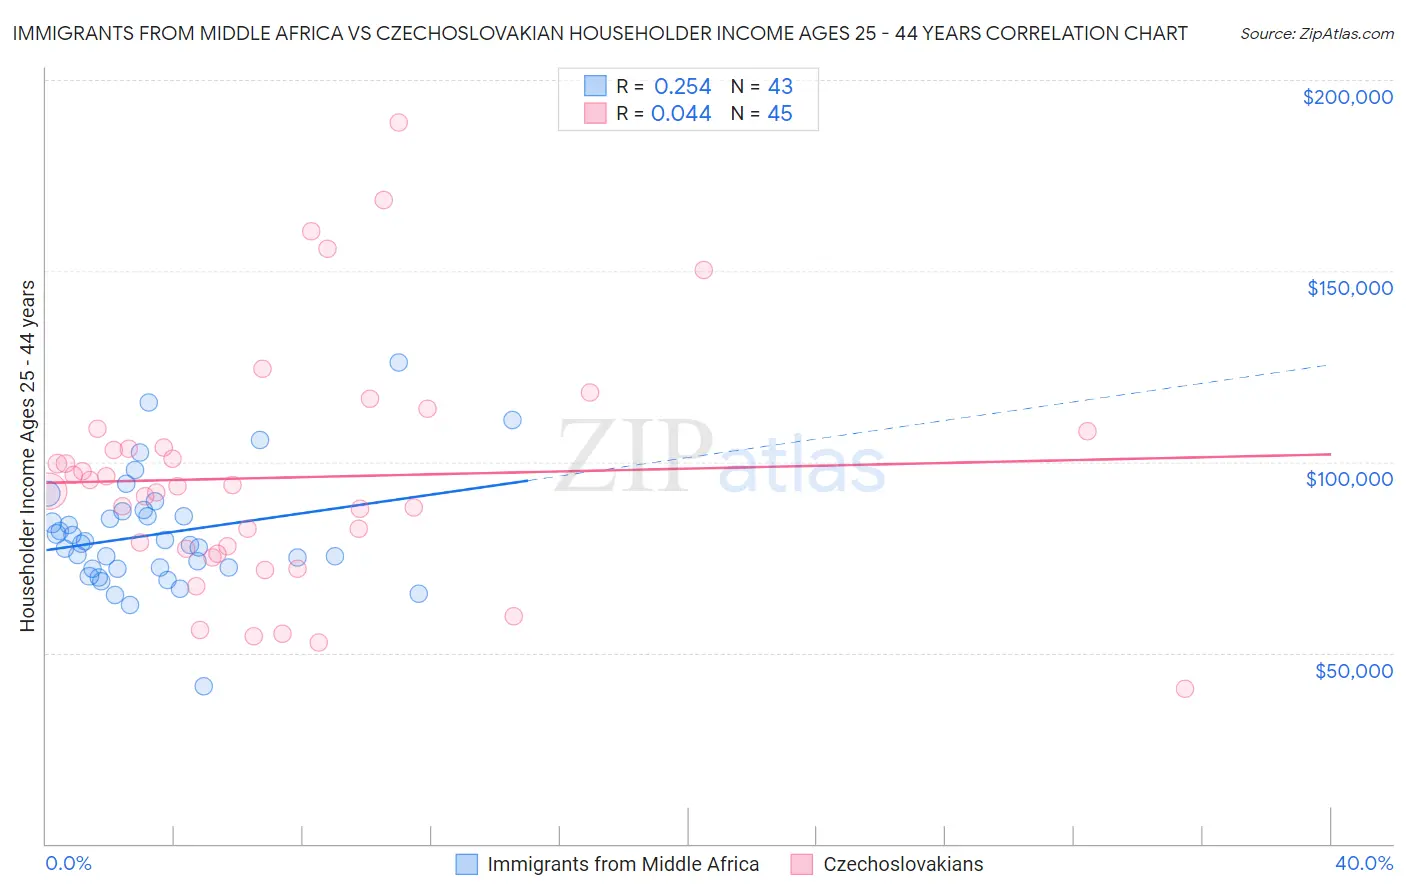 Immigrants from Middle Africa vs Czechoslovakian Householder Income Ages 25 - 44 years